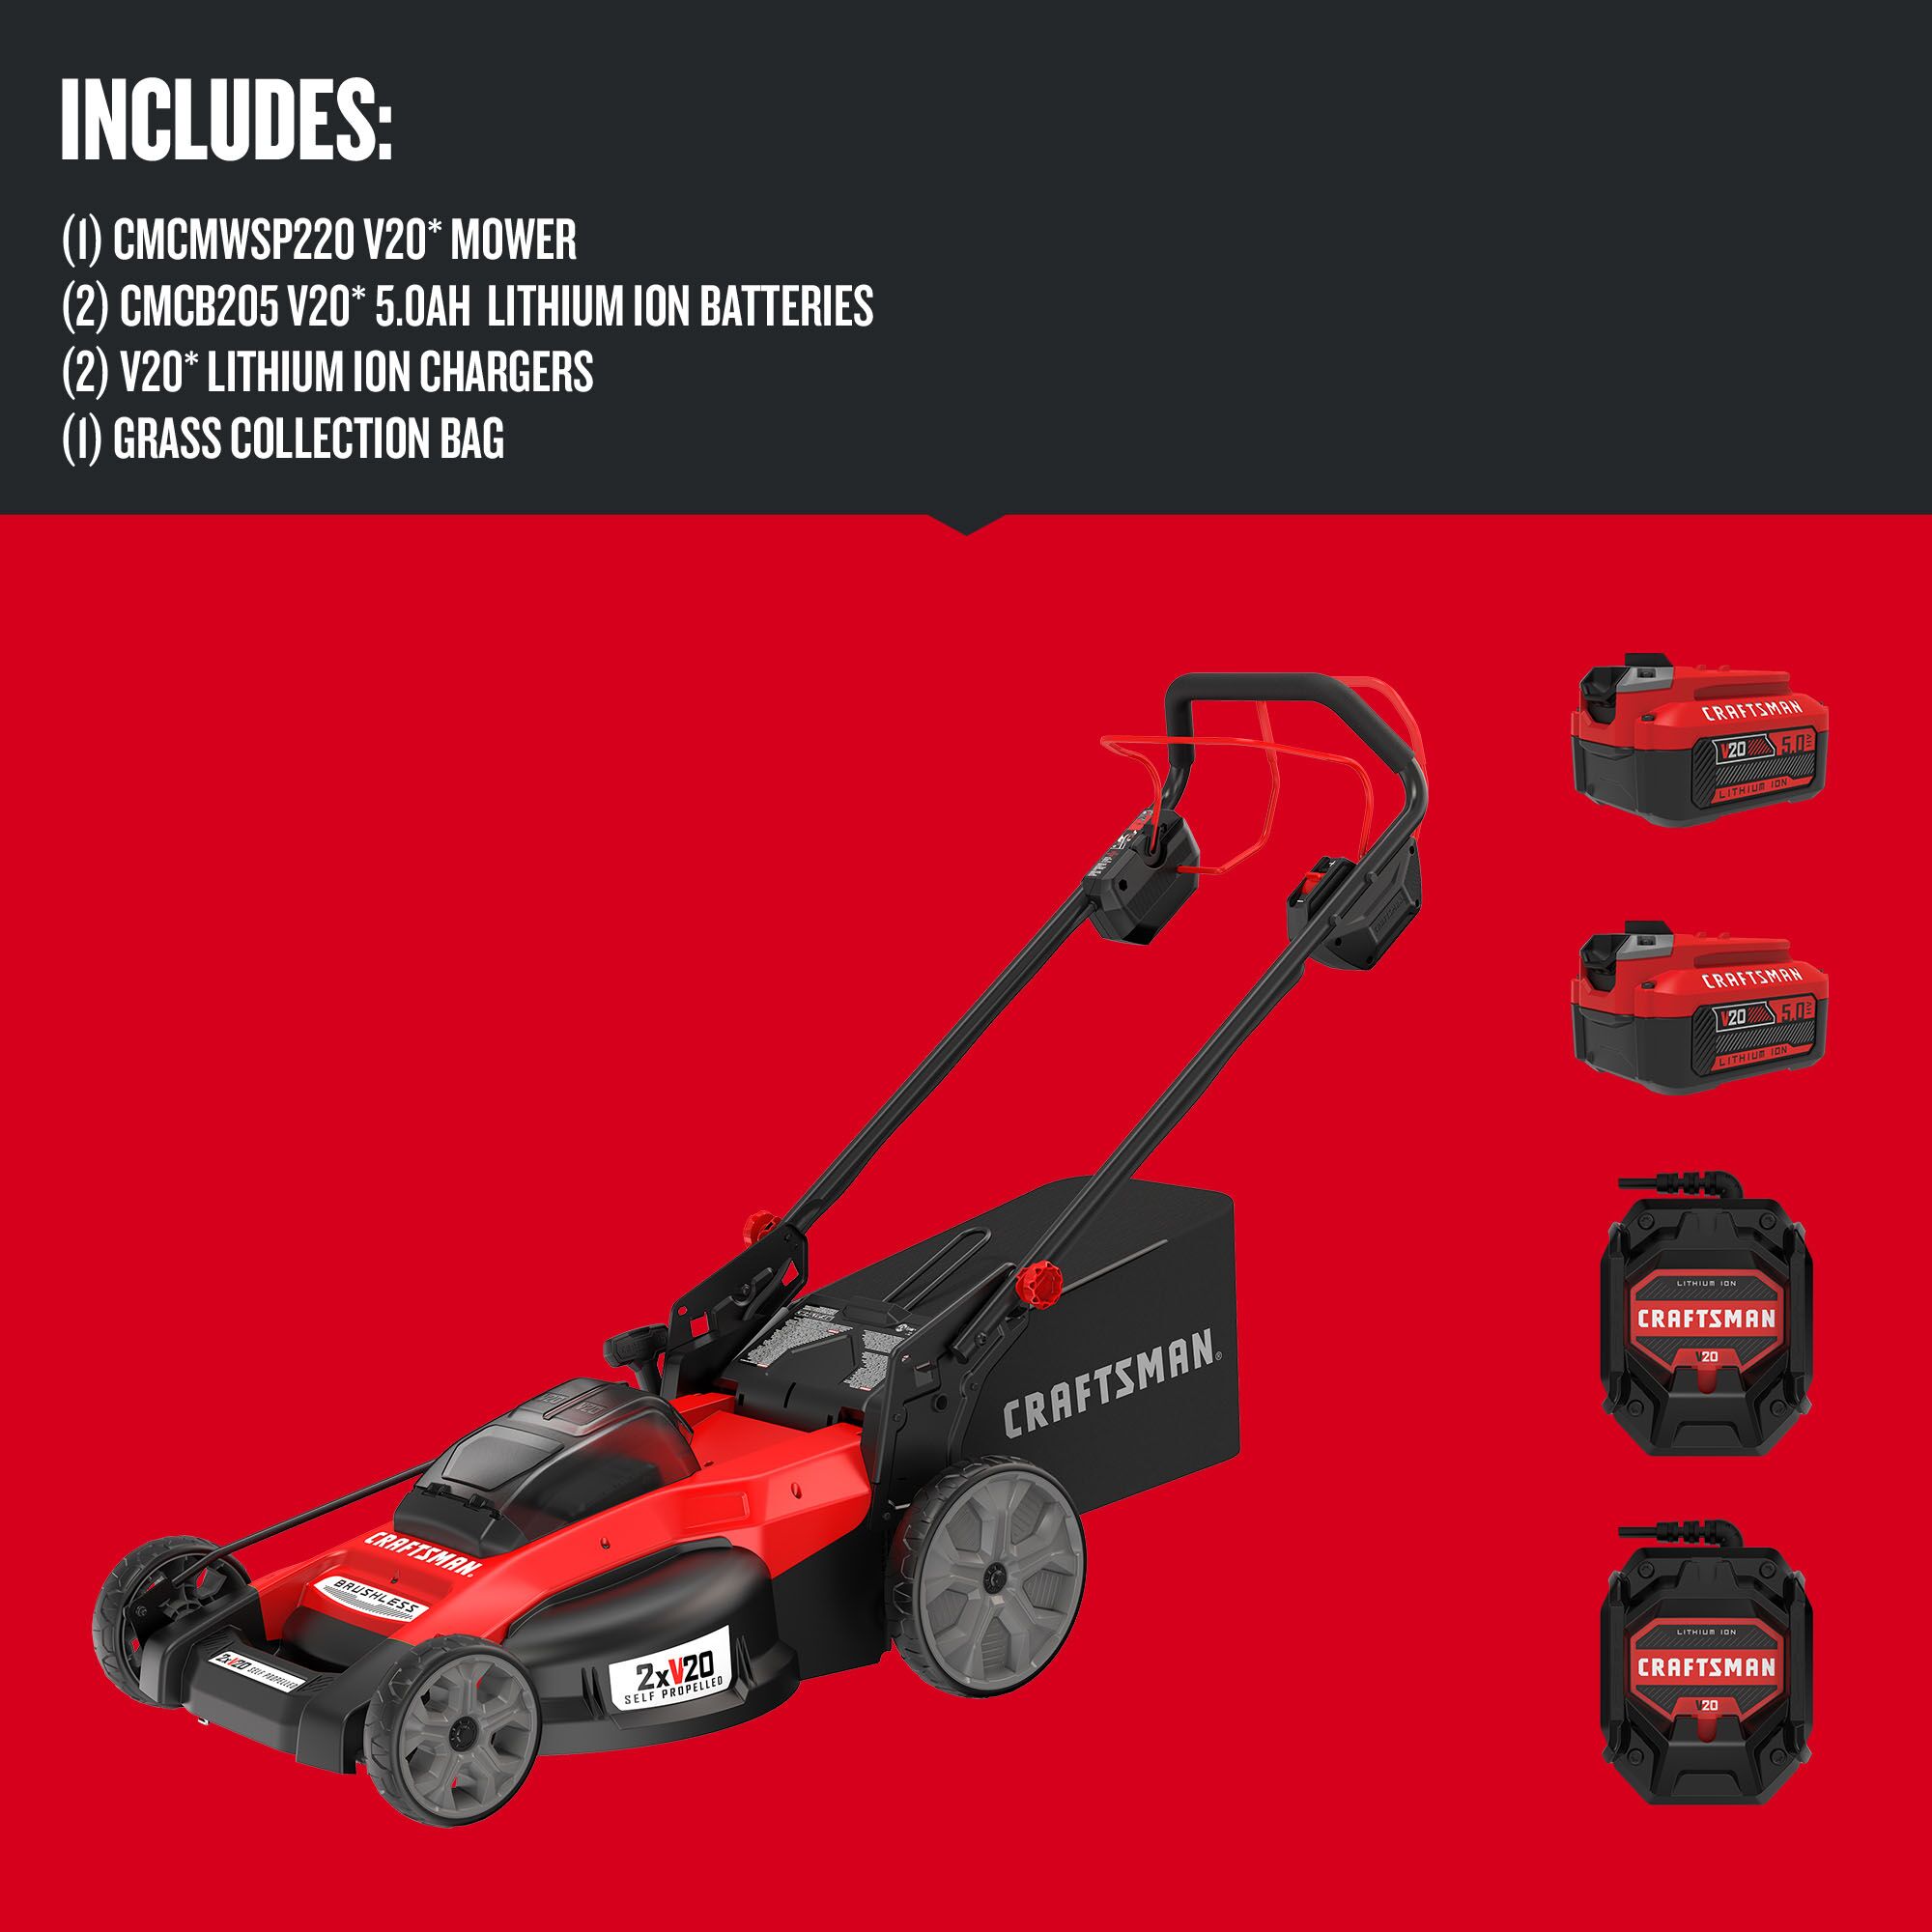 Graphic of CRAFTSMAN Push Mowers highlighting product features